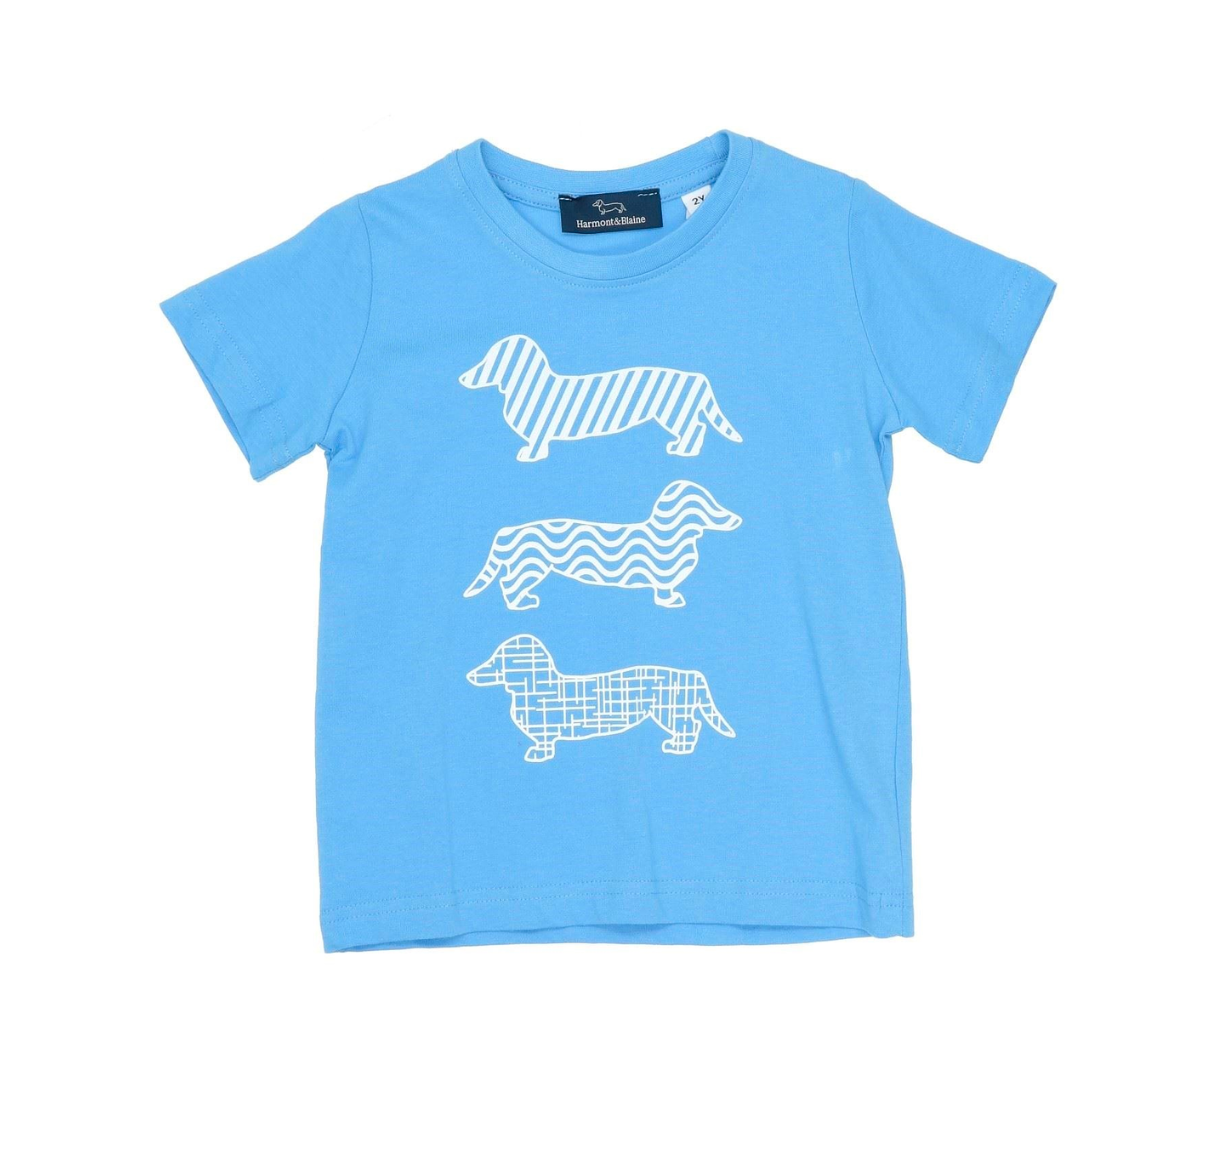 HARMONT &amp; BLAINE - Dachshunds blue t-shirt - 2 years old